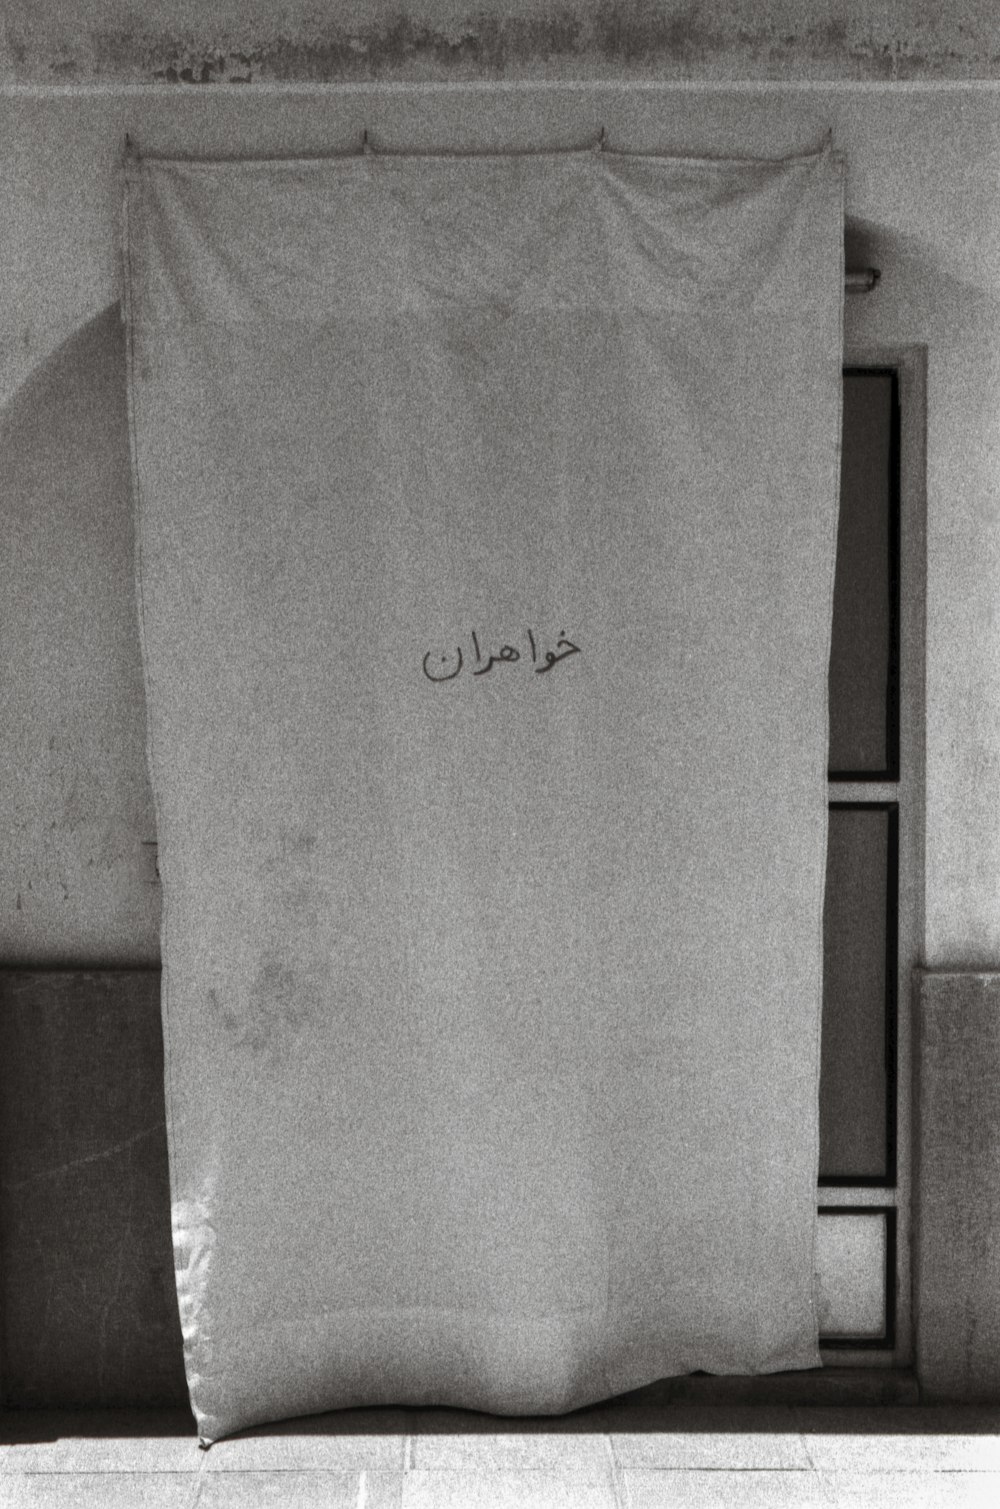 a black and white photo of a curtain with writing on it